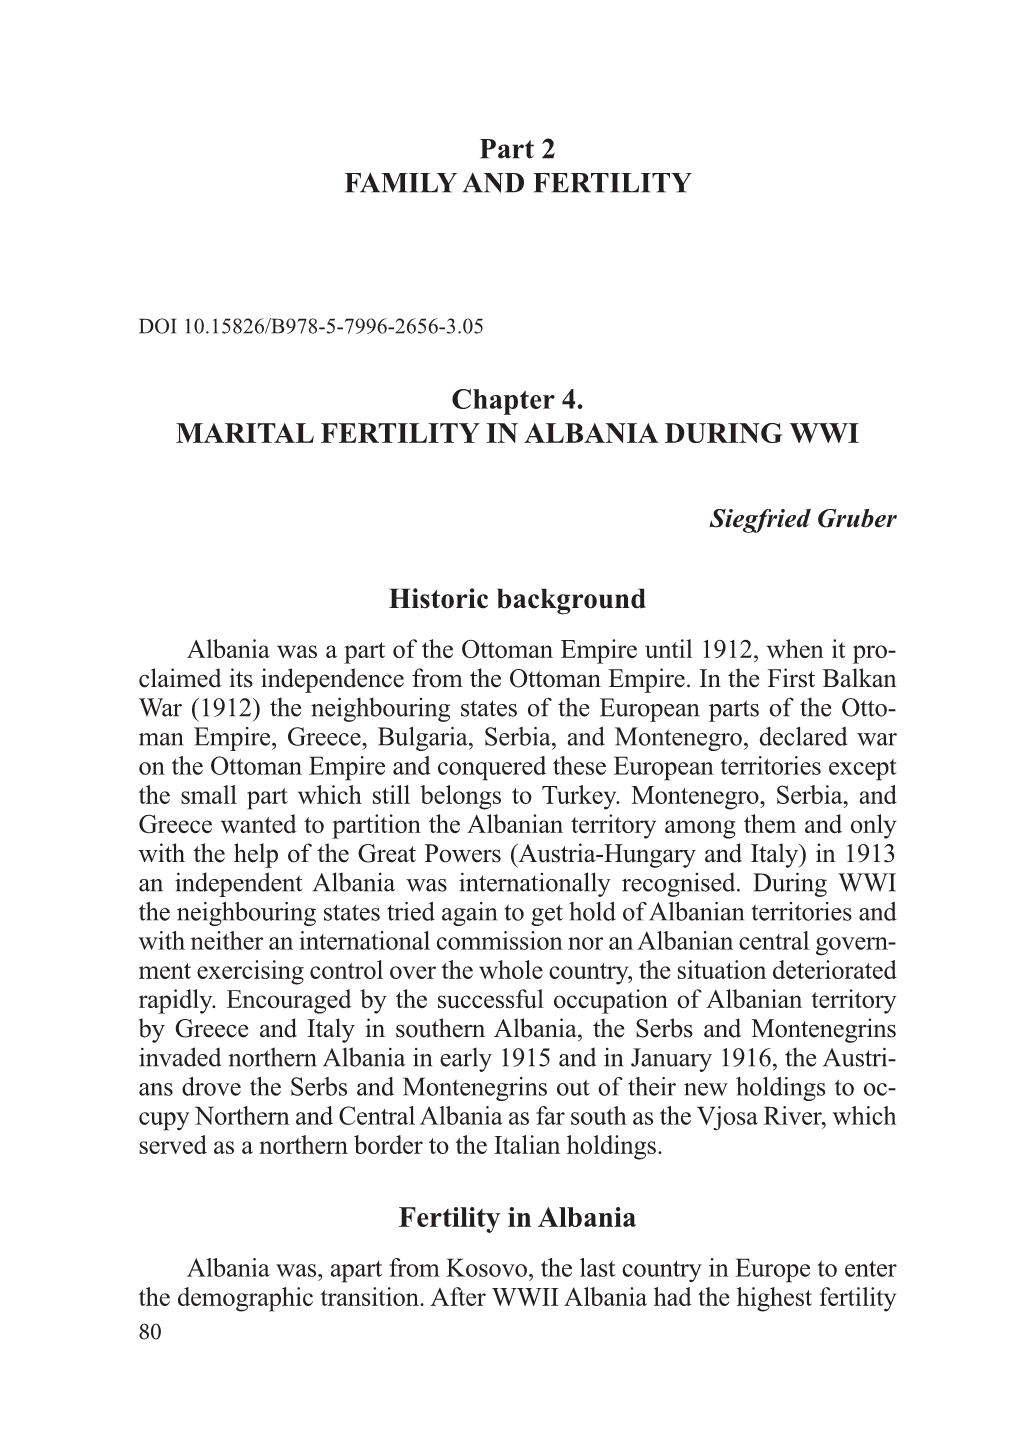 Chapter 4. MARITAL FERTILITY in ALBANIA DURING WWI